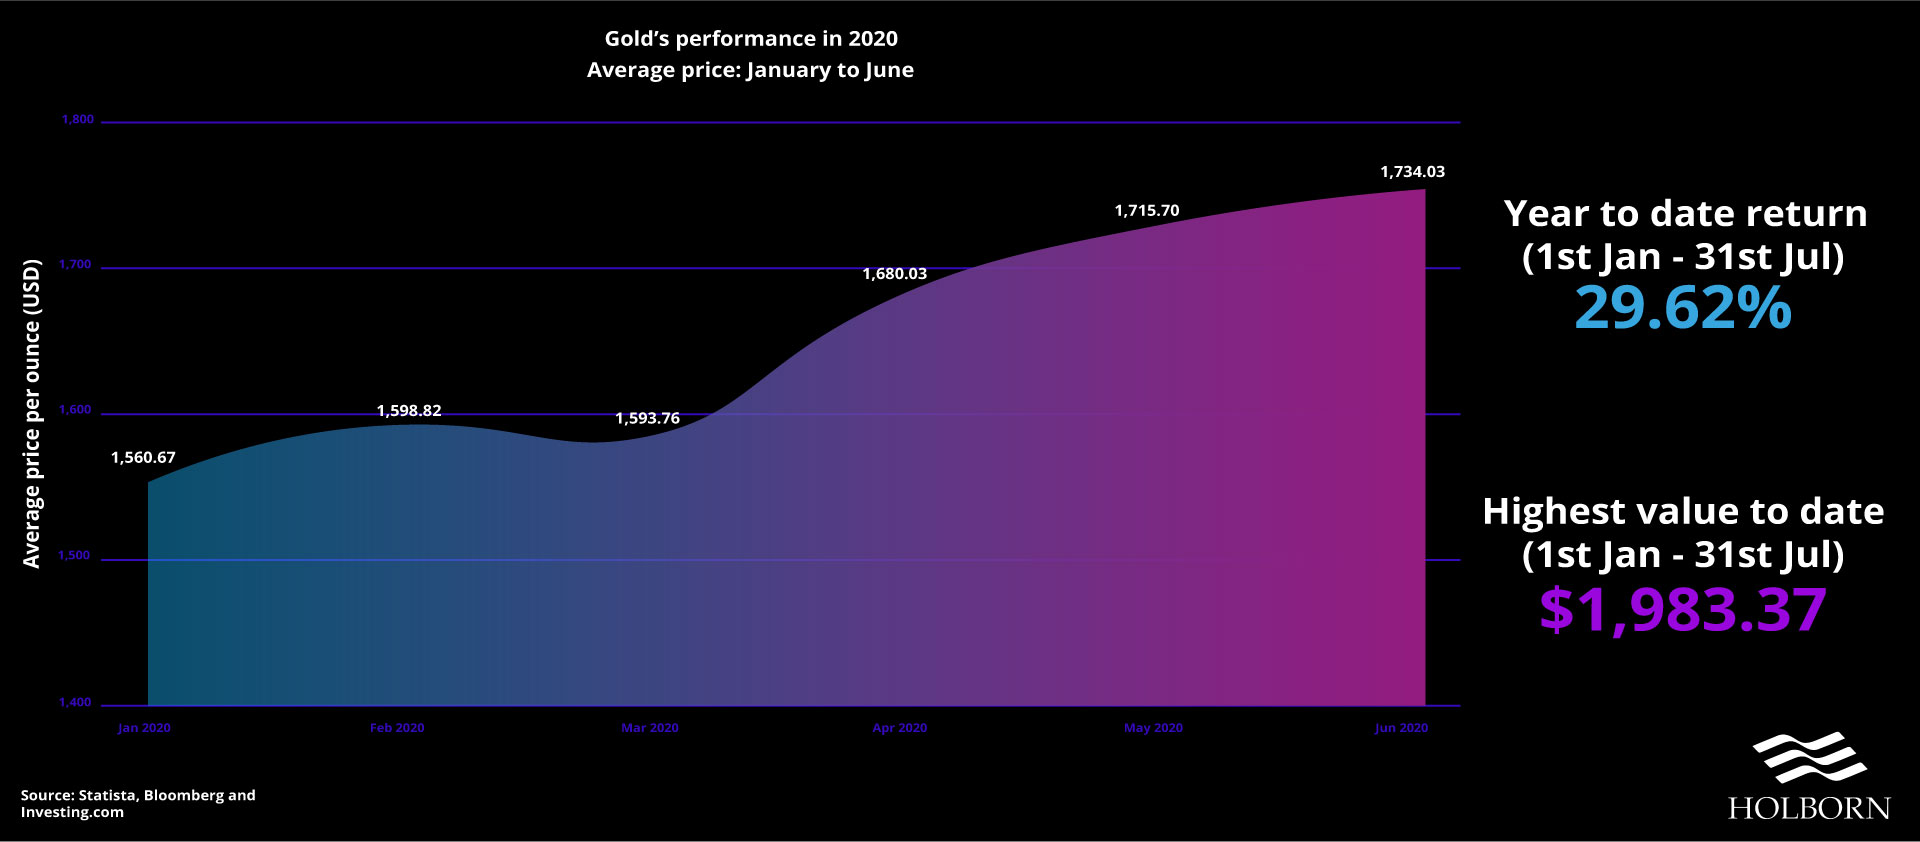 The market performance of gold in 2020